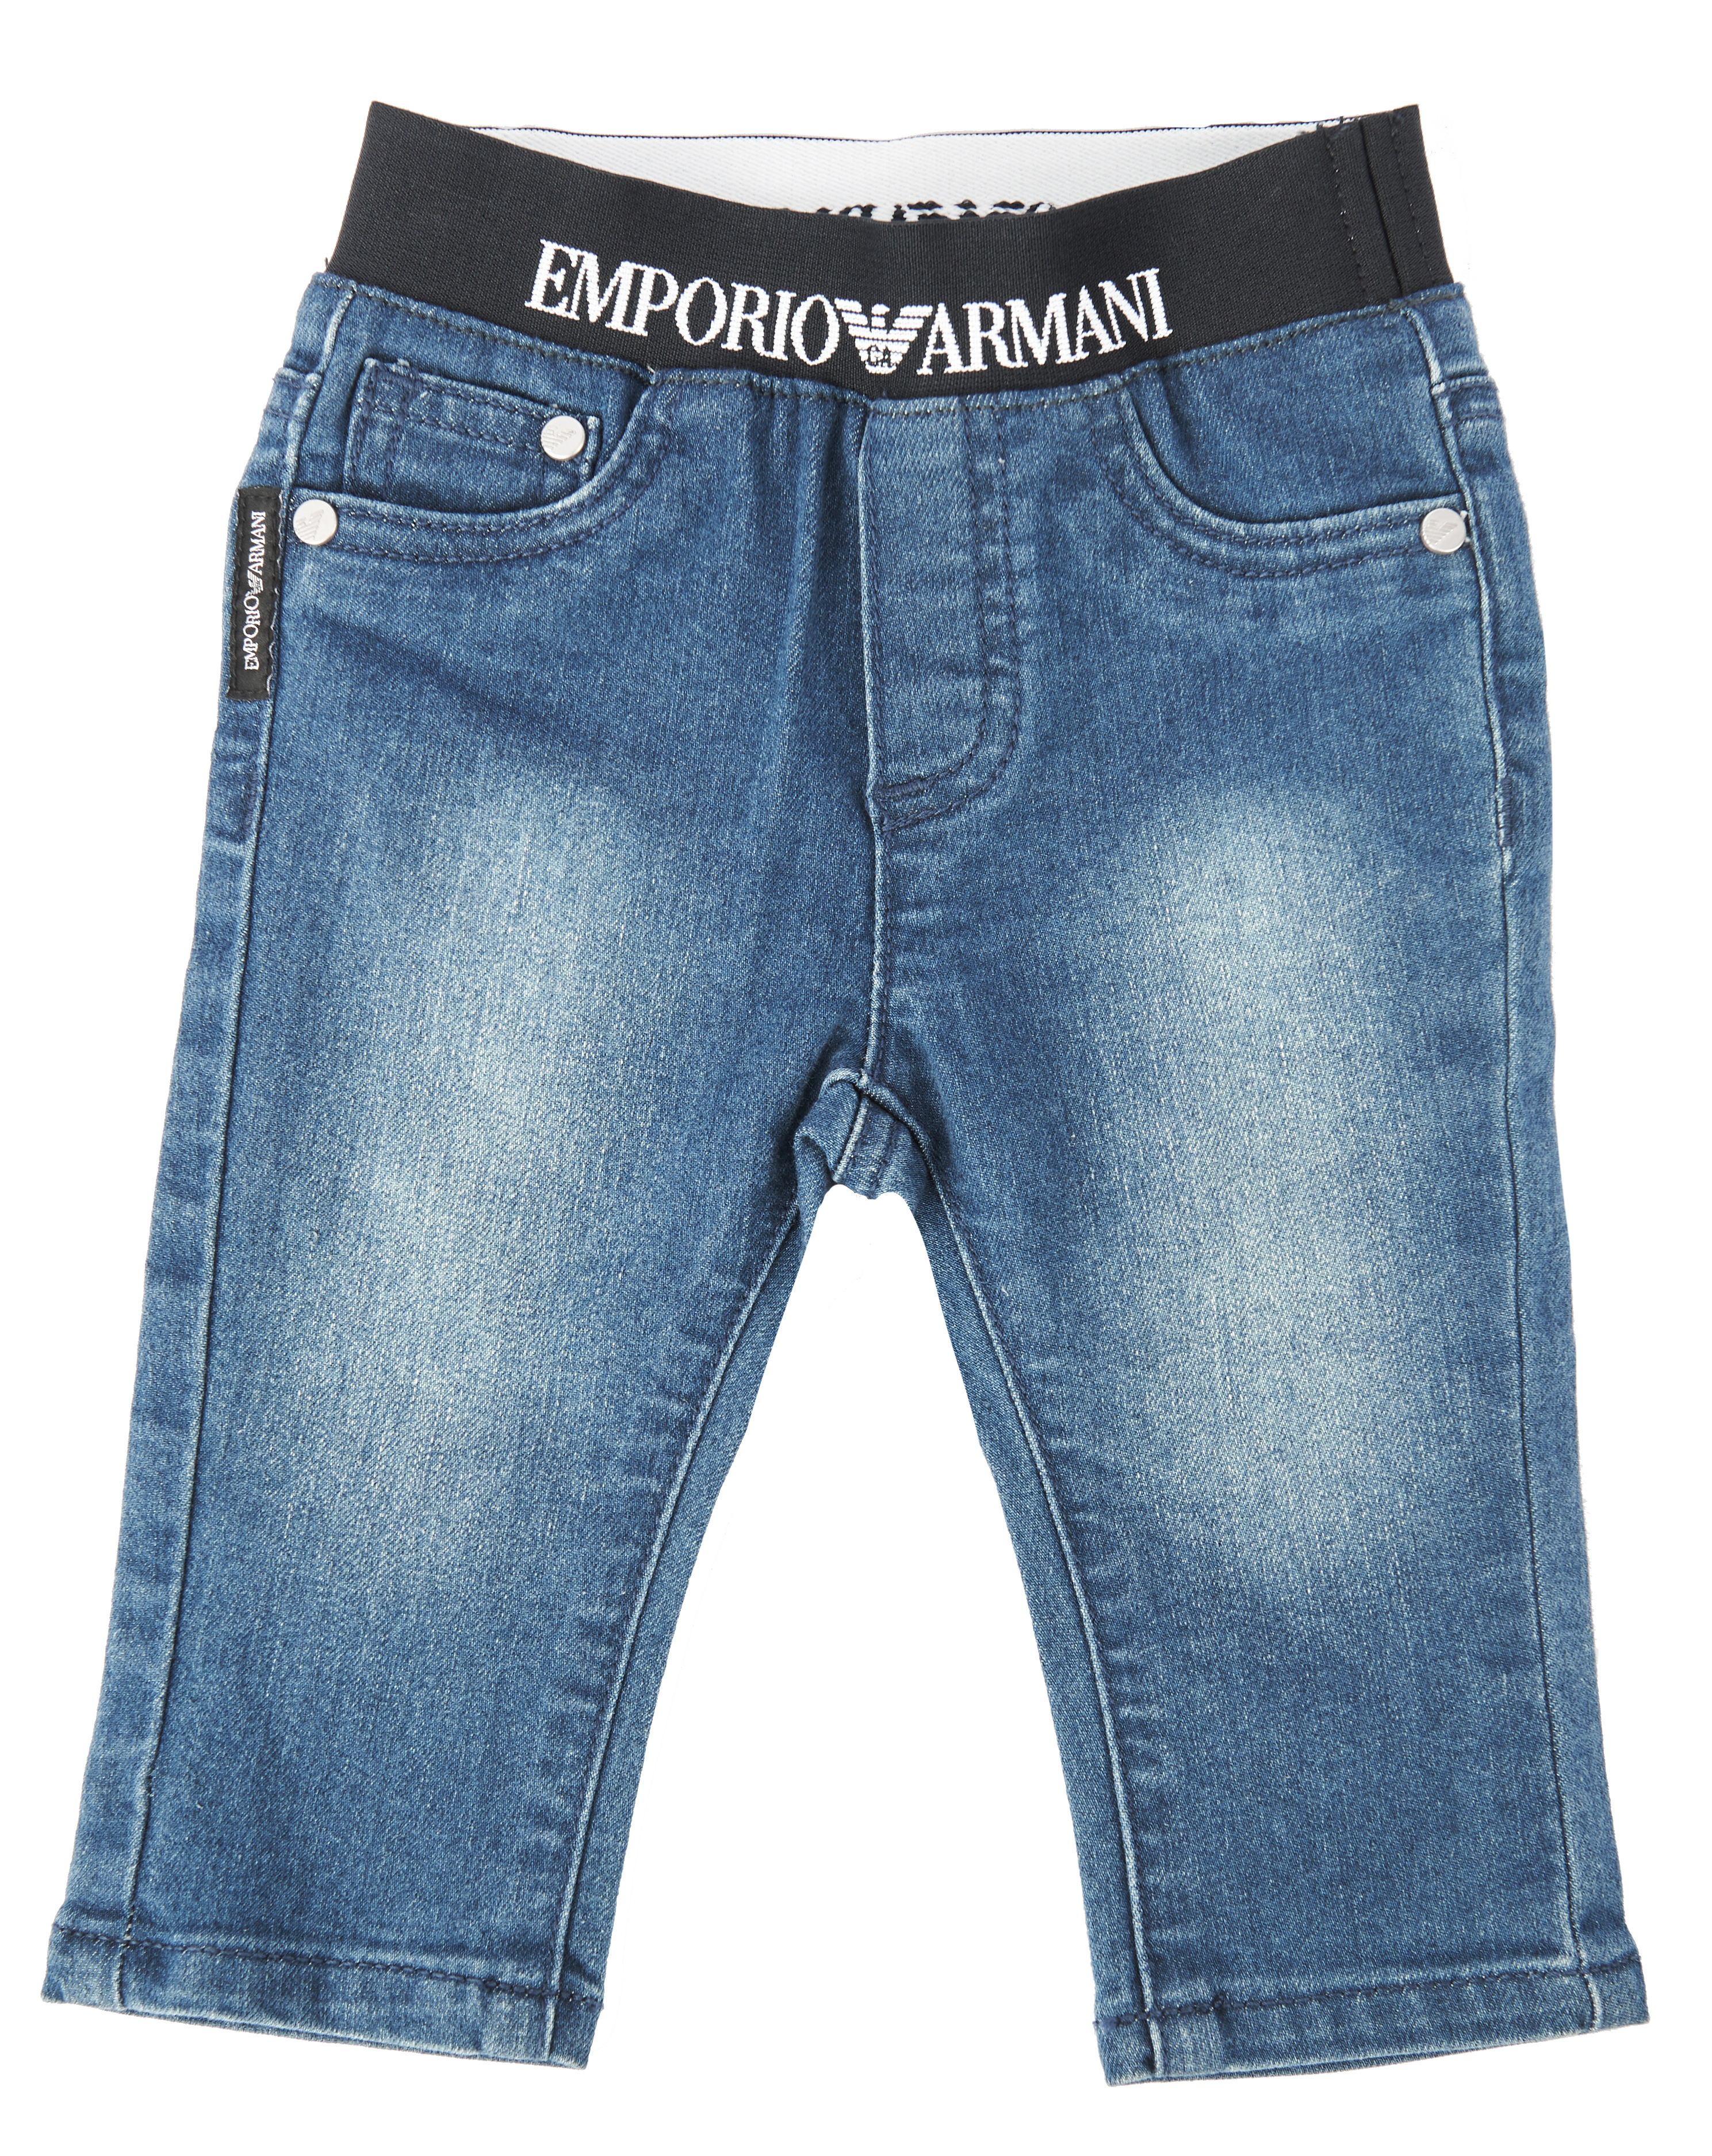 EMPORIO ARMANI men's Jeans buy for 41800 KZT in the official Viled store, art. 6GHJ07